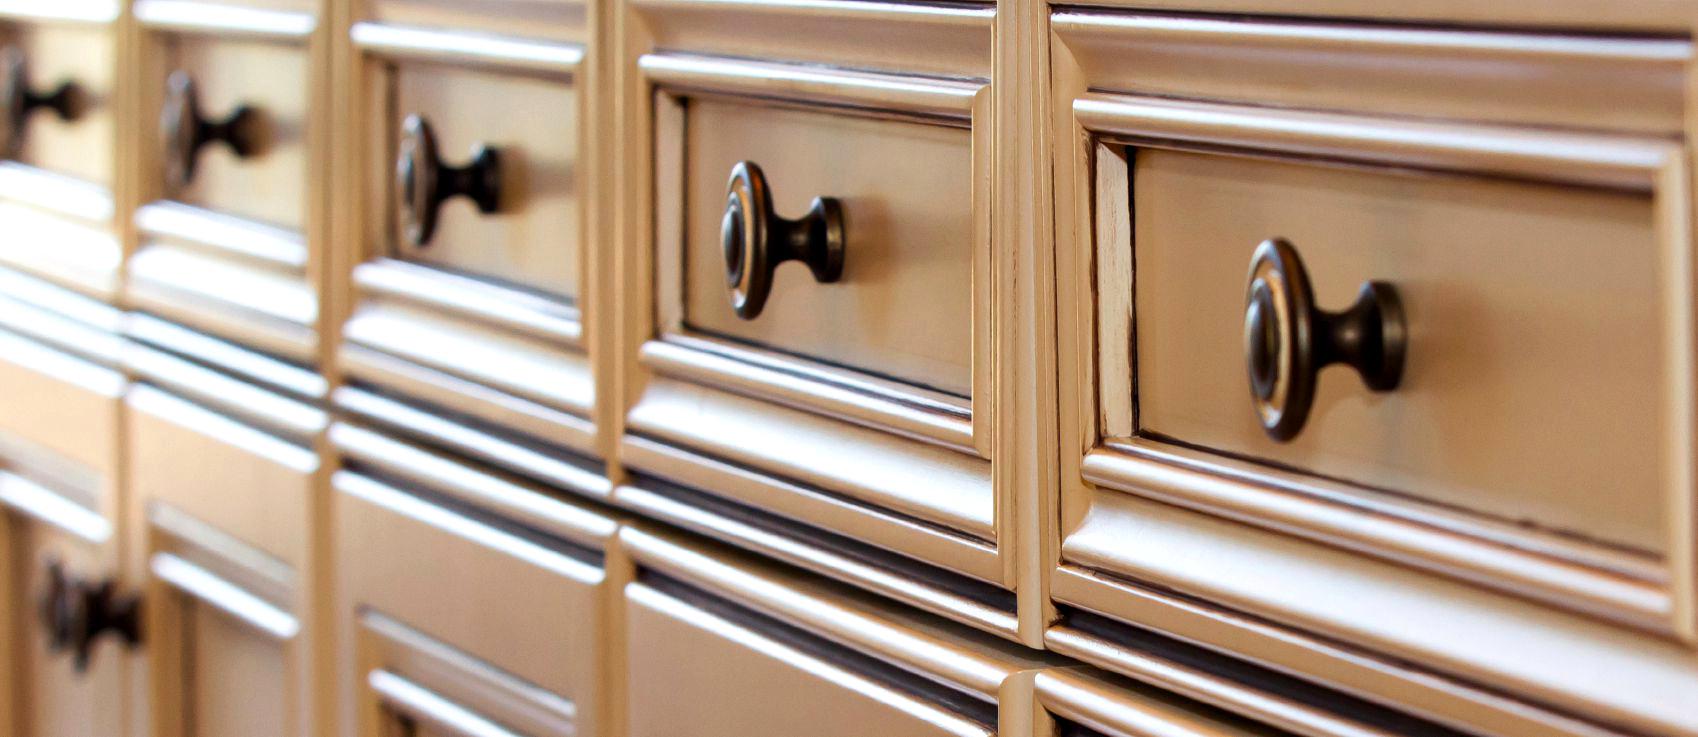 Several reasons for choose knobs for cabinet